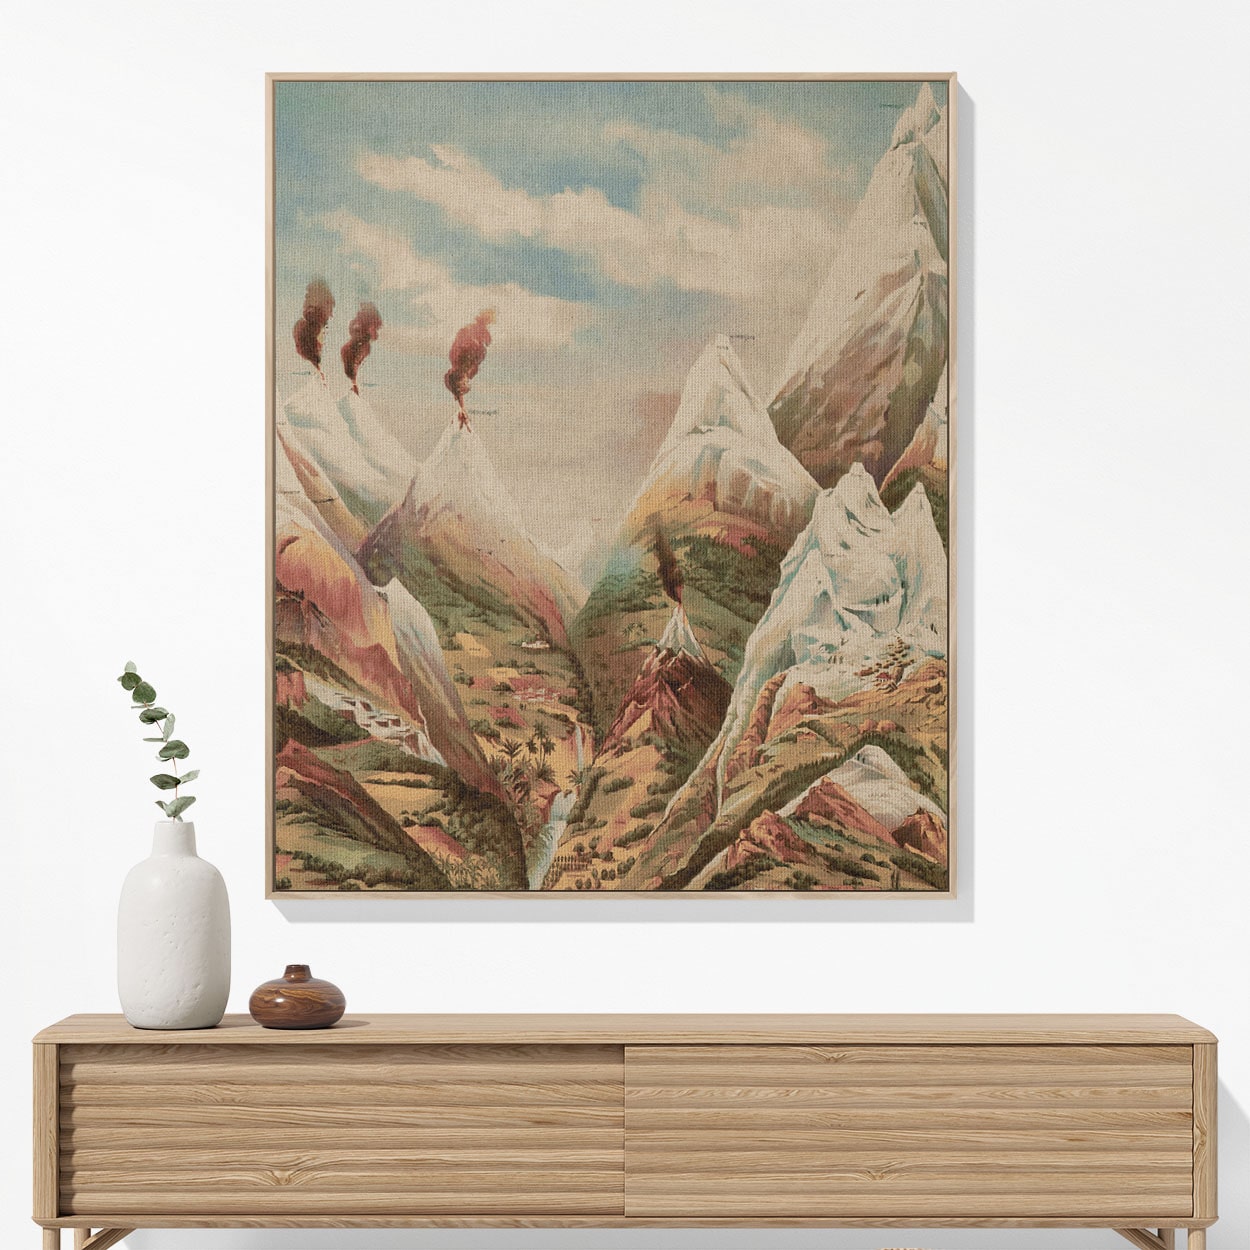 Cool Mountain Painting Woven Blanket Woven Blanket Hanging on a Wall as Framed Wall Art